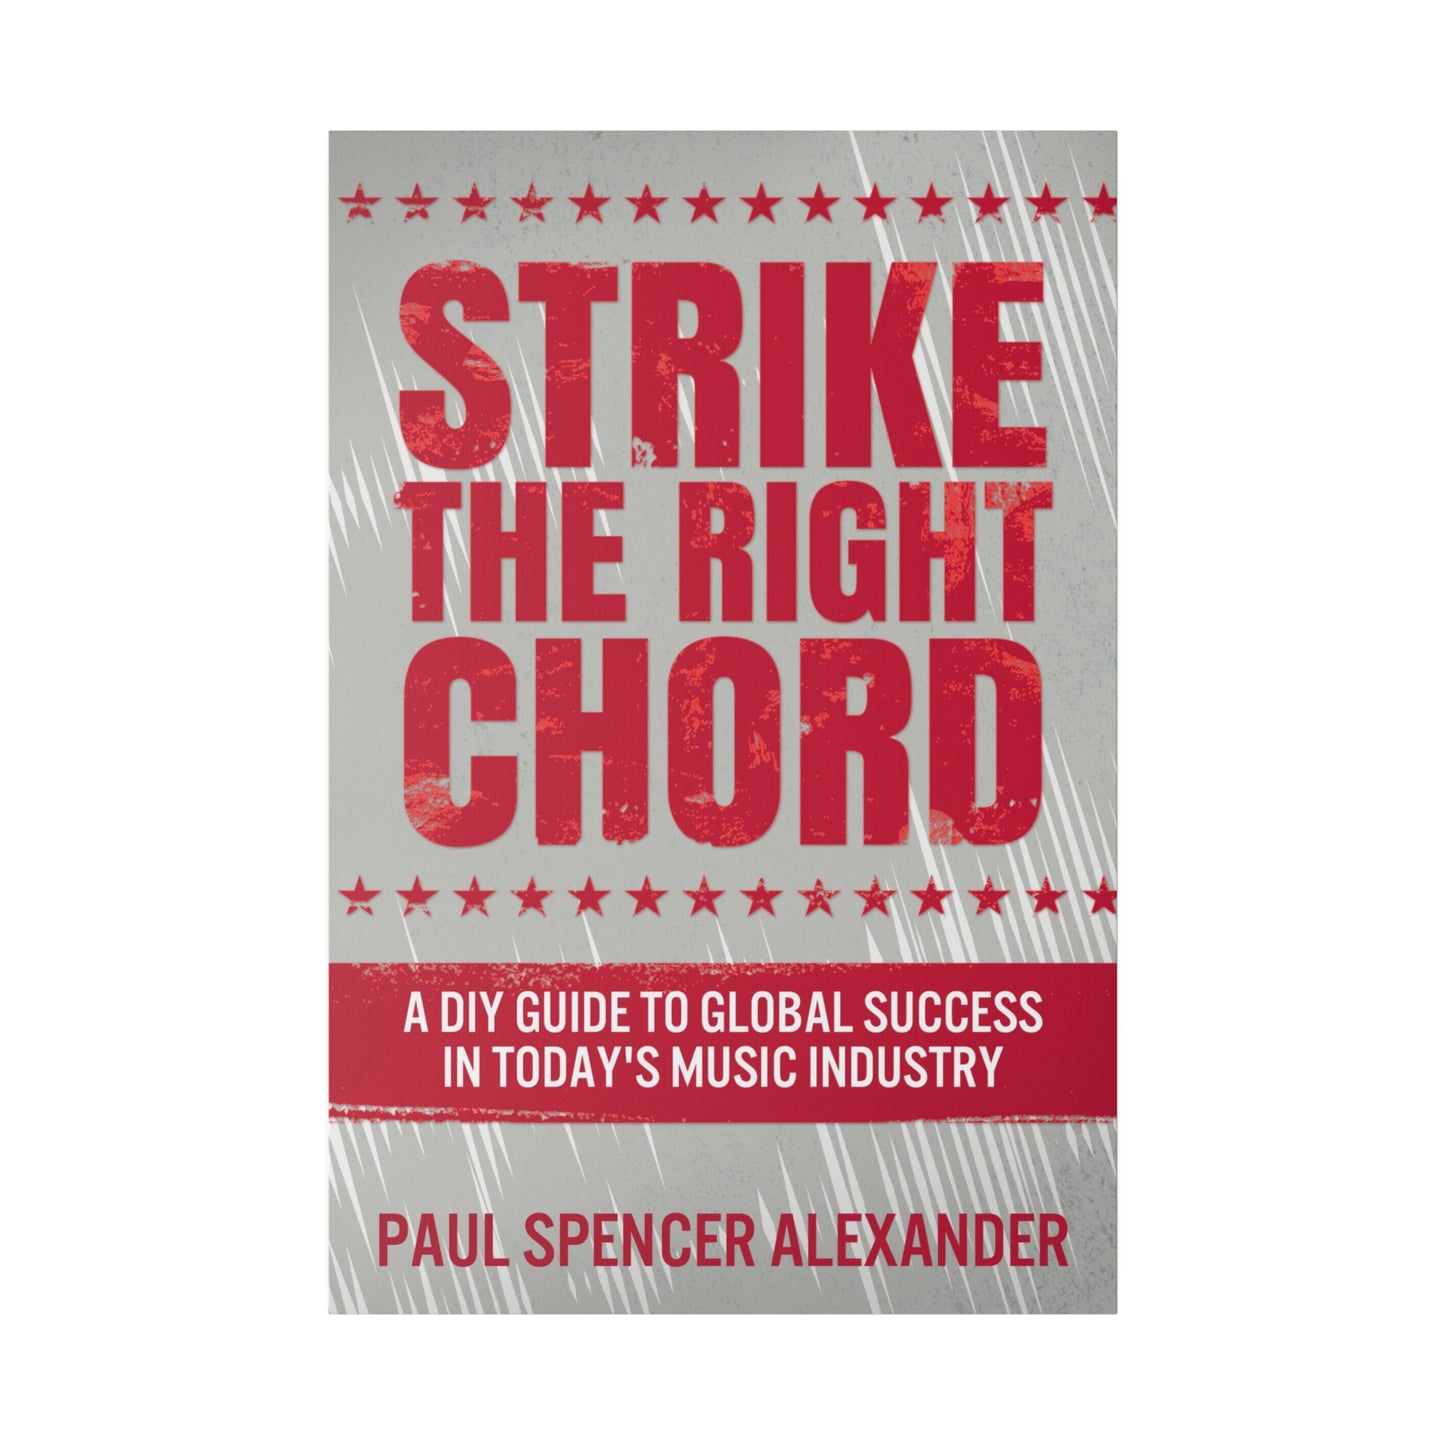 Strike The Right Chord - Canvas